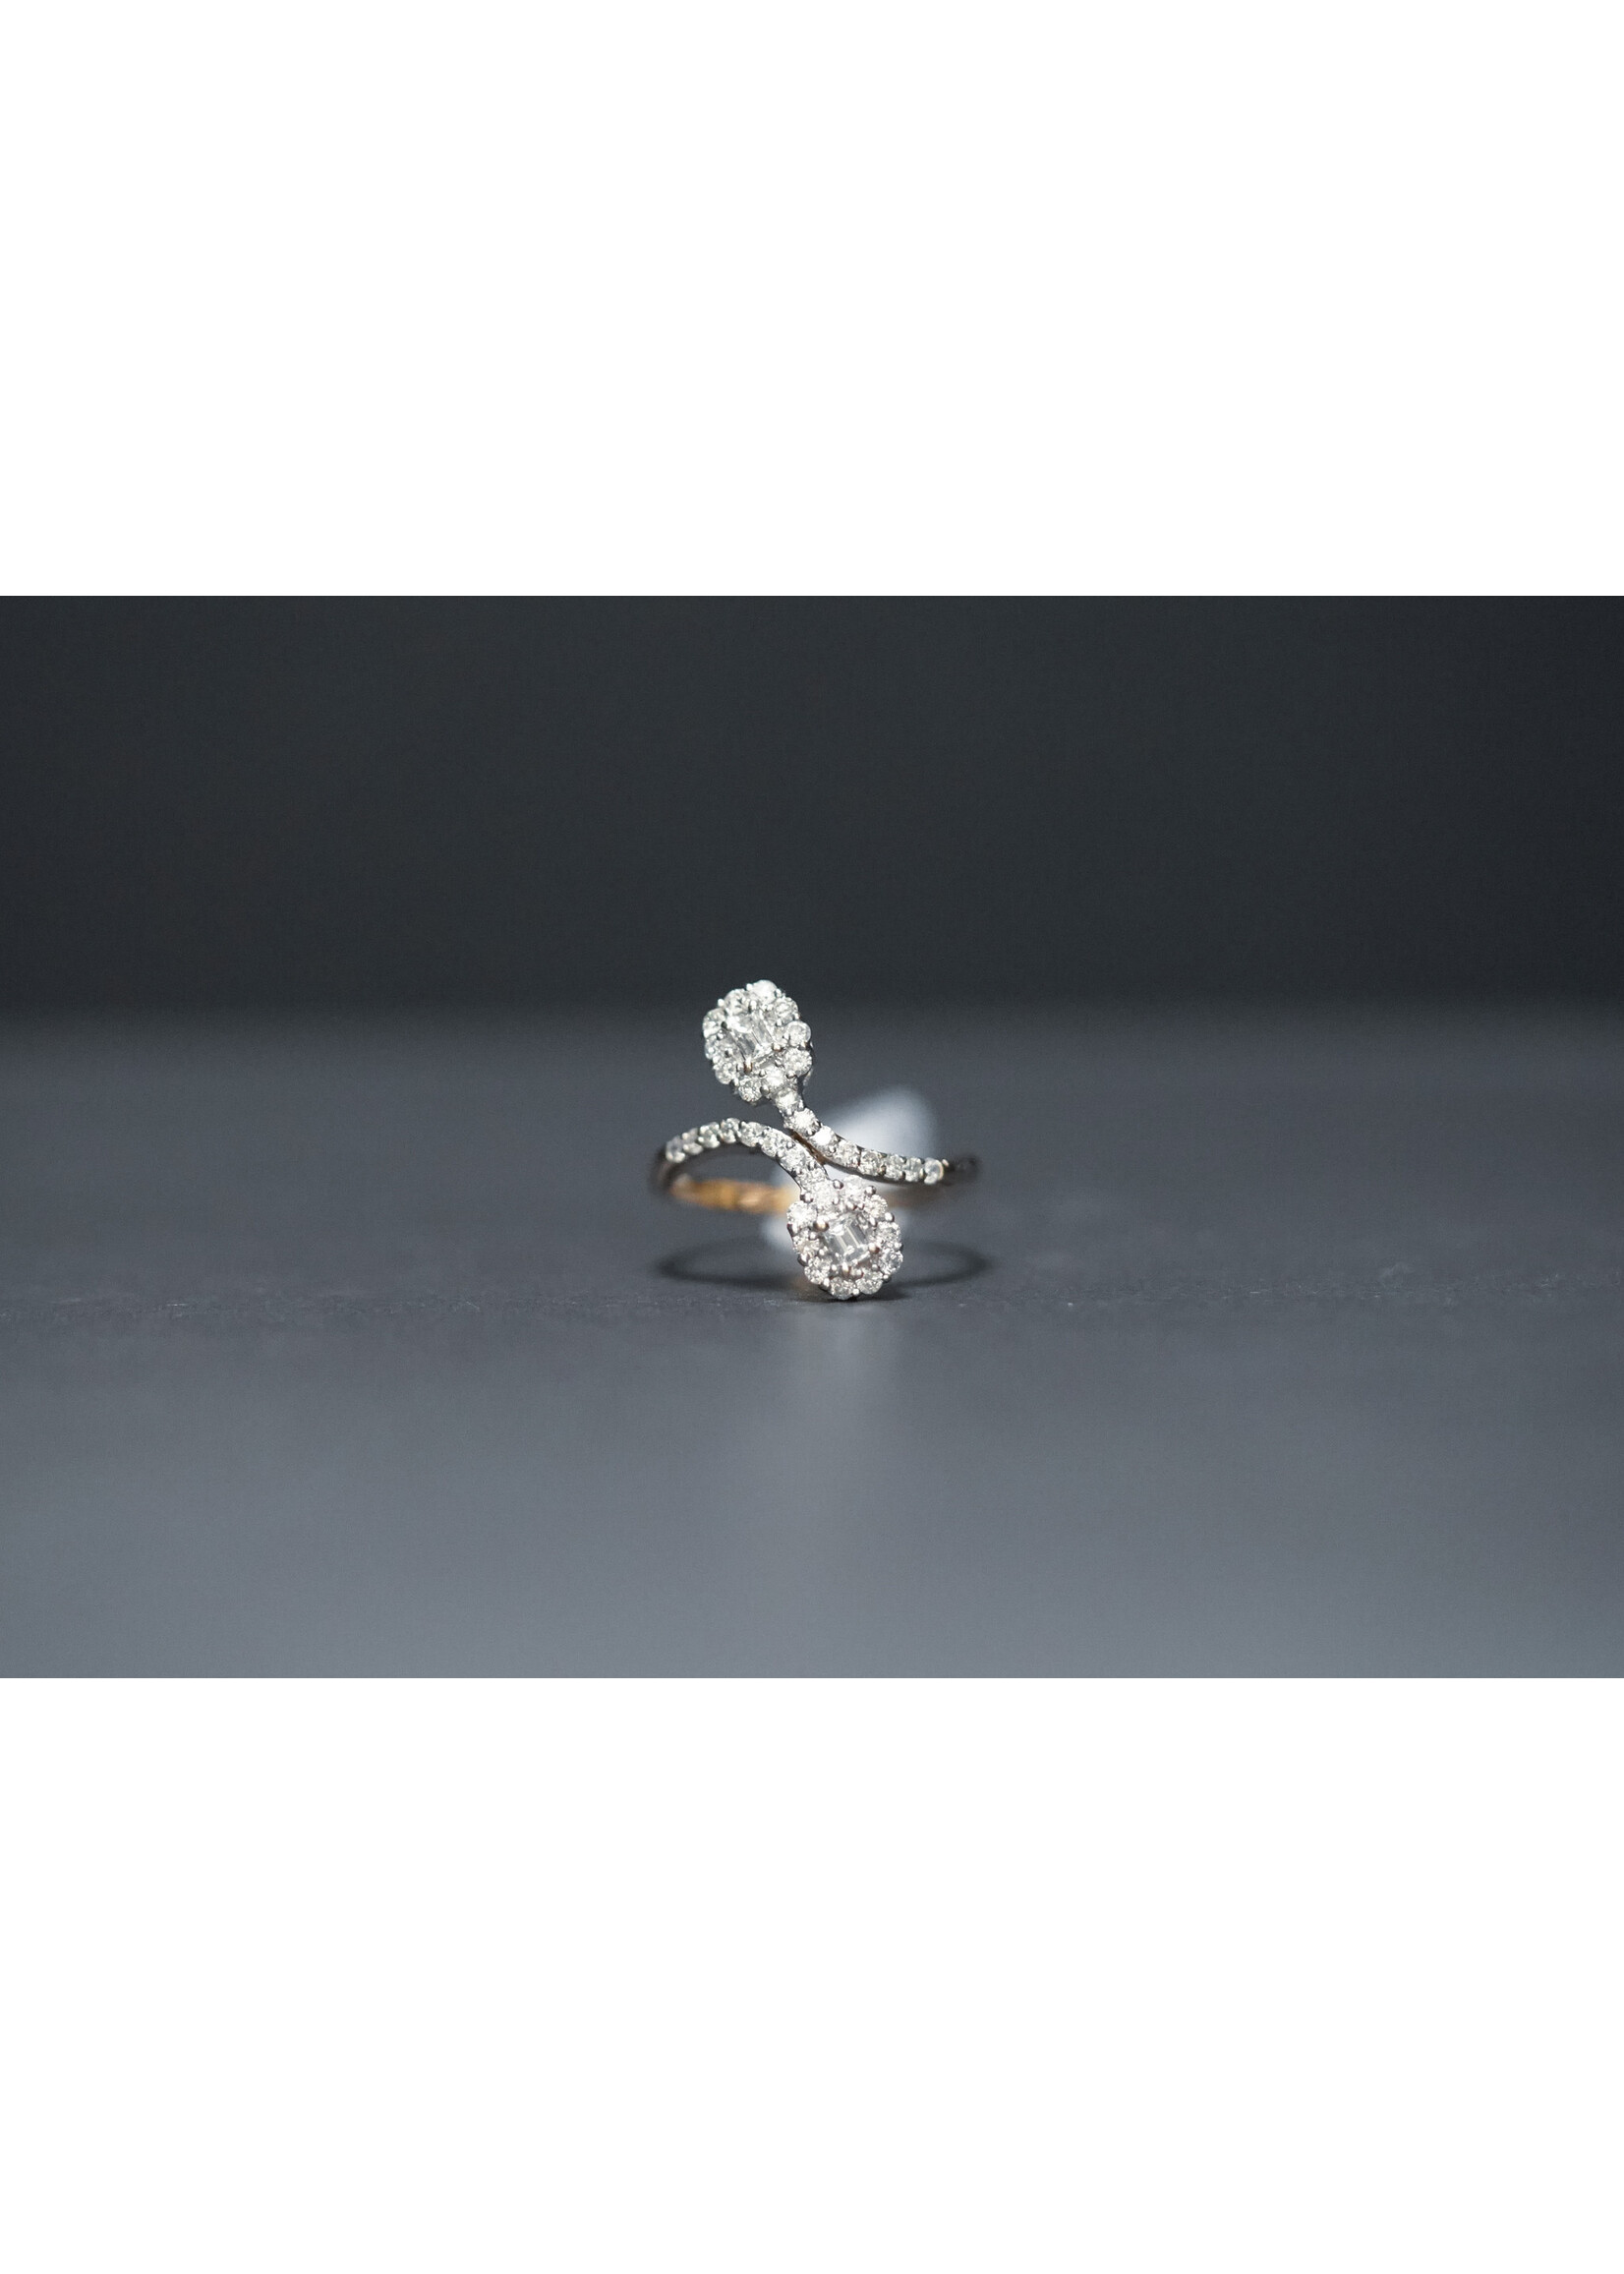 14KY 4.4g 1.50ctw Diamond Bypass Fashion Ring (size 8)